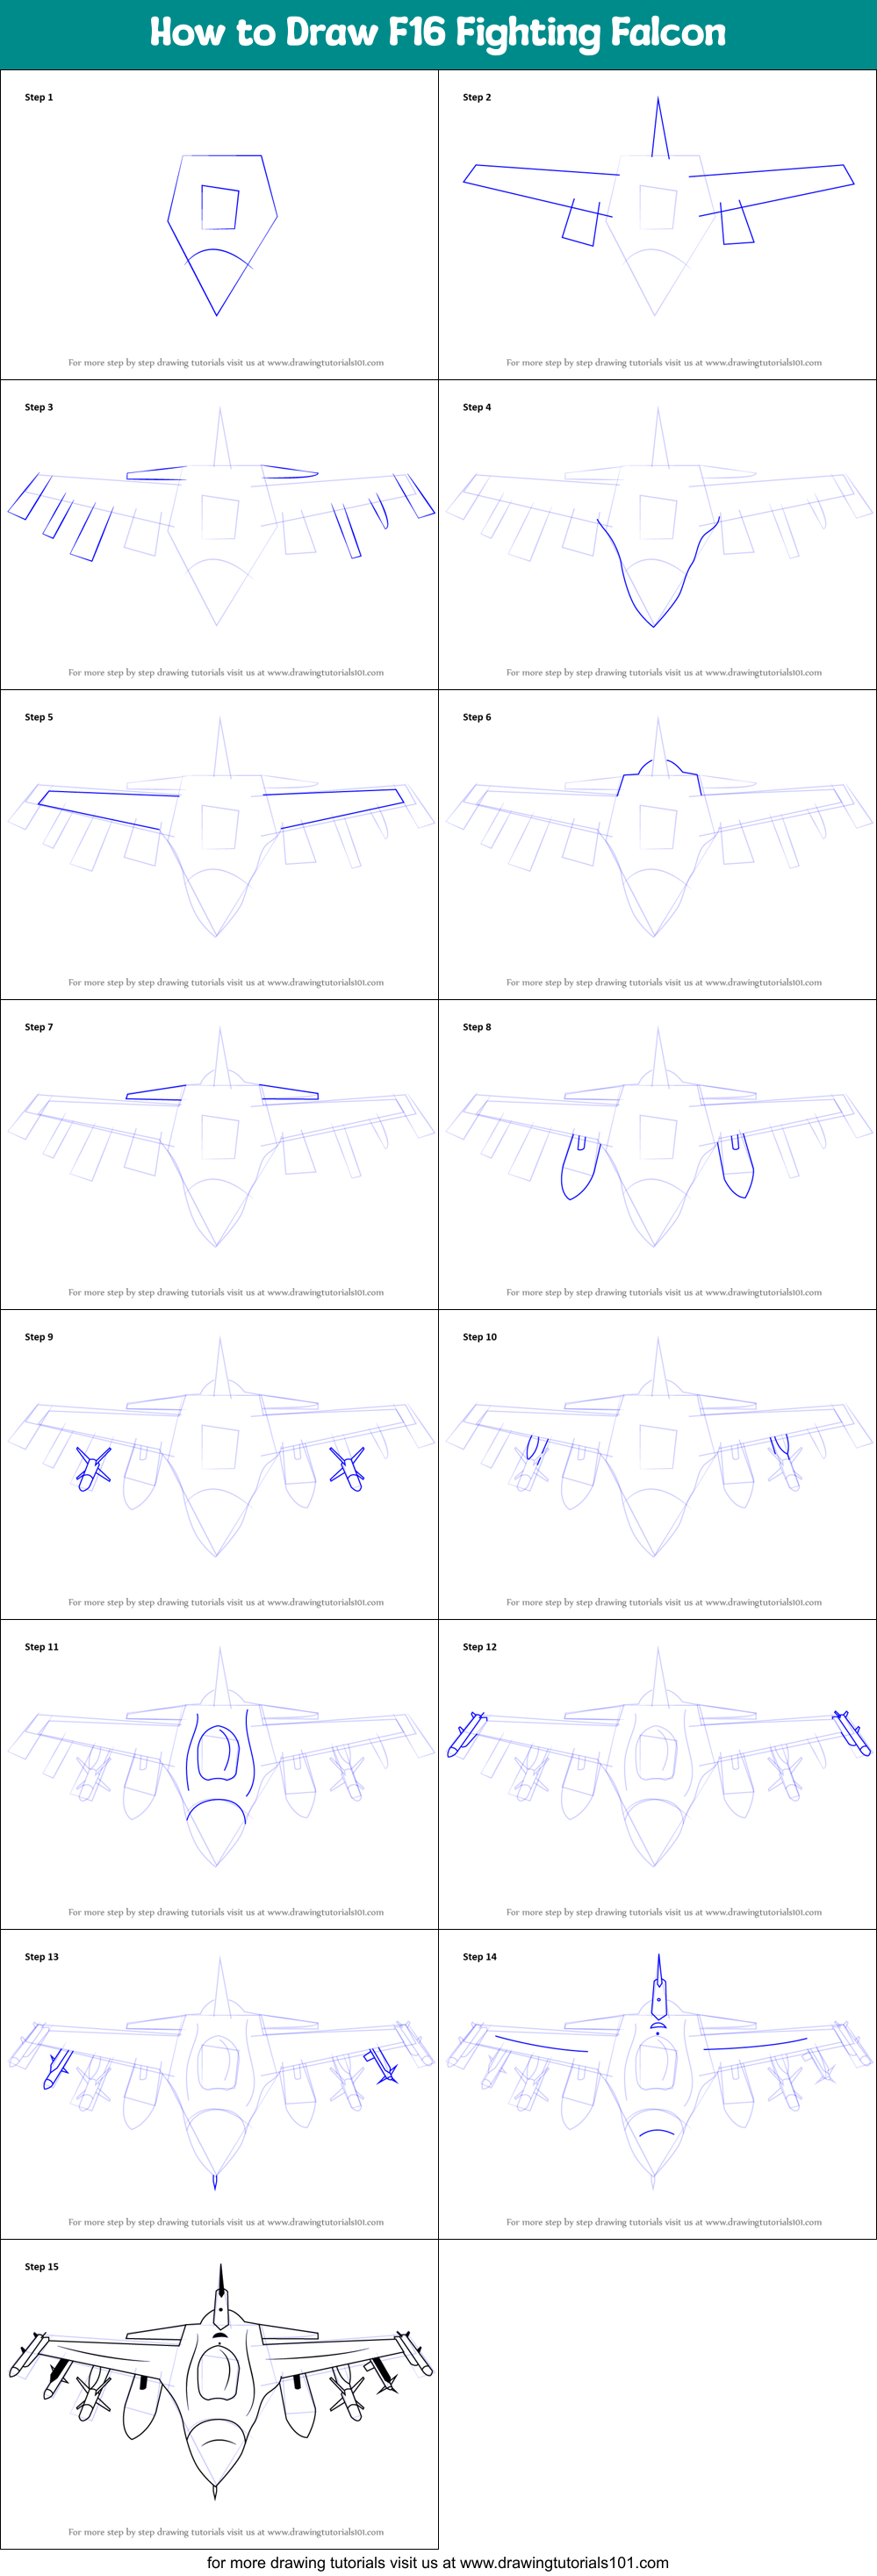 How To Draw F16 Fighting Falcon Printable Step By Step Drawing Sheet Drawingtutorials101 Com - roblox fighting falcon